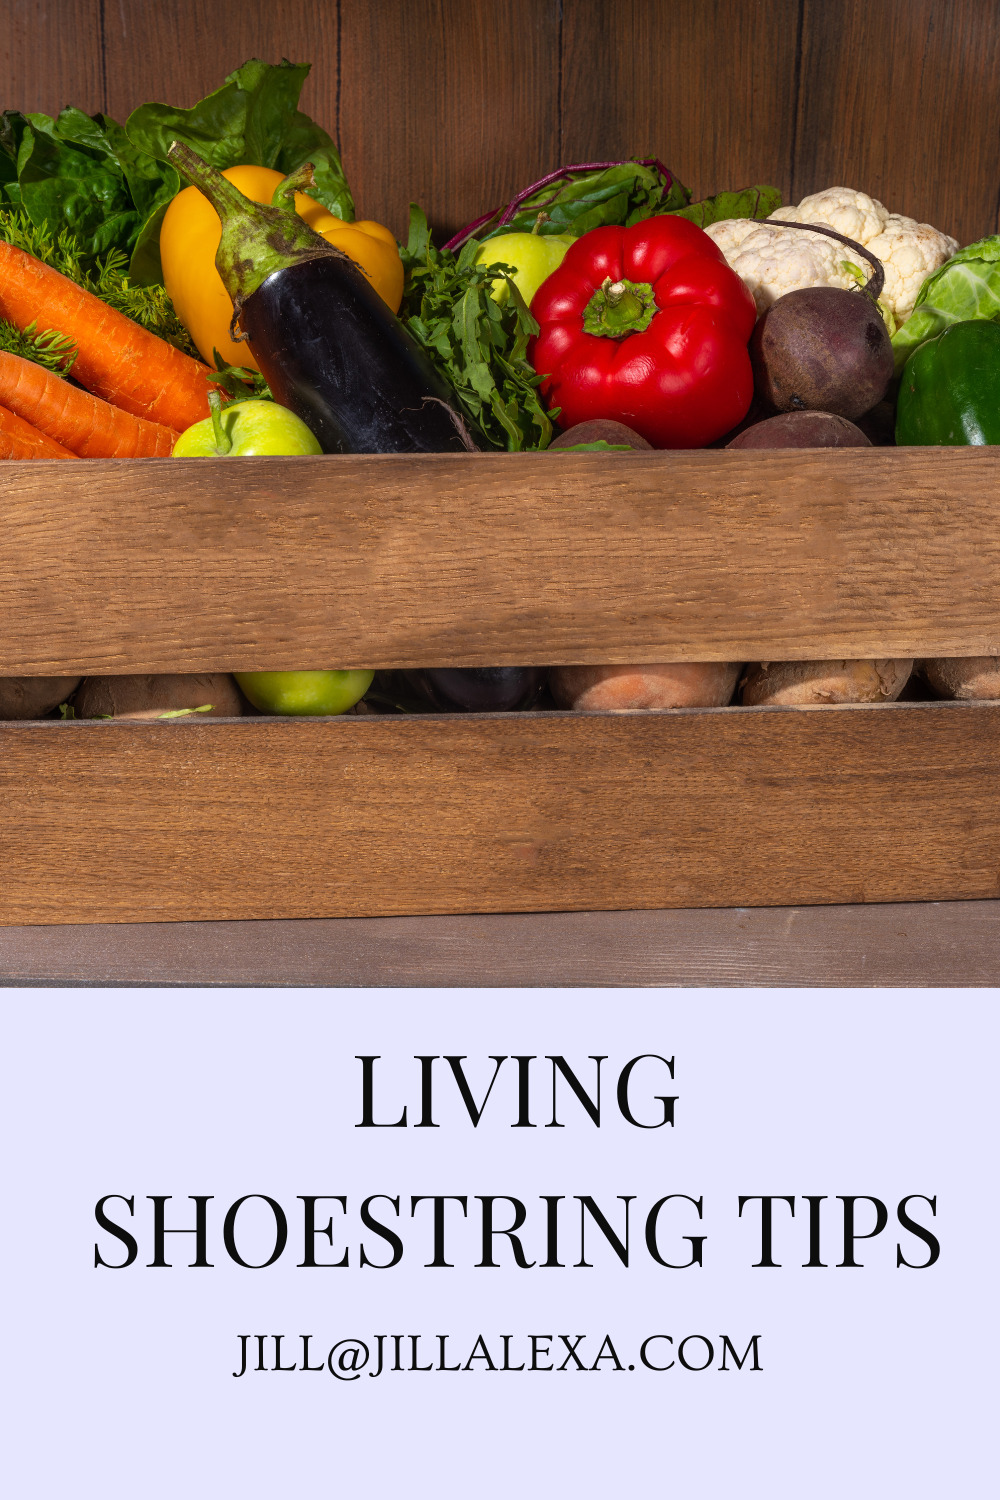 LIVING SHOESTRING TIPS - buy in bulk at the market and share